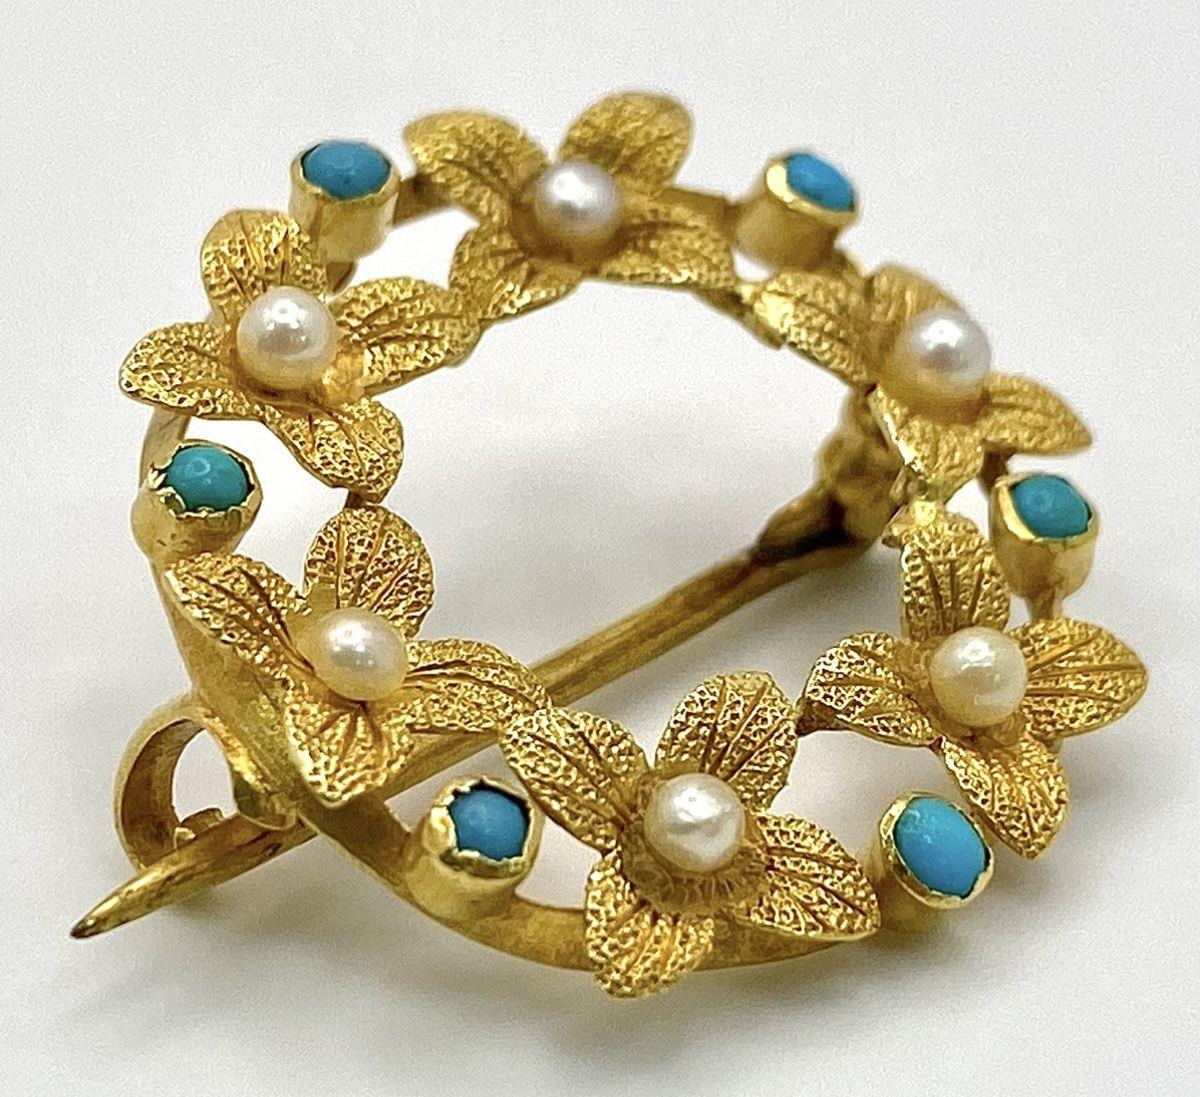 A 15ct Gold Small Wreath Brooch. Seed pearl and turquoise decoration. 22mm. 2.6g total weight. - Image 2 of 4